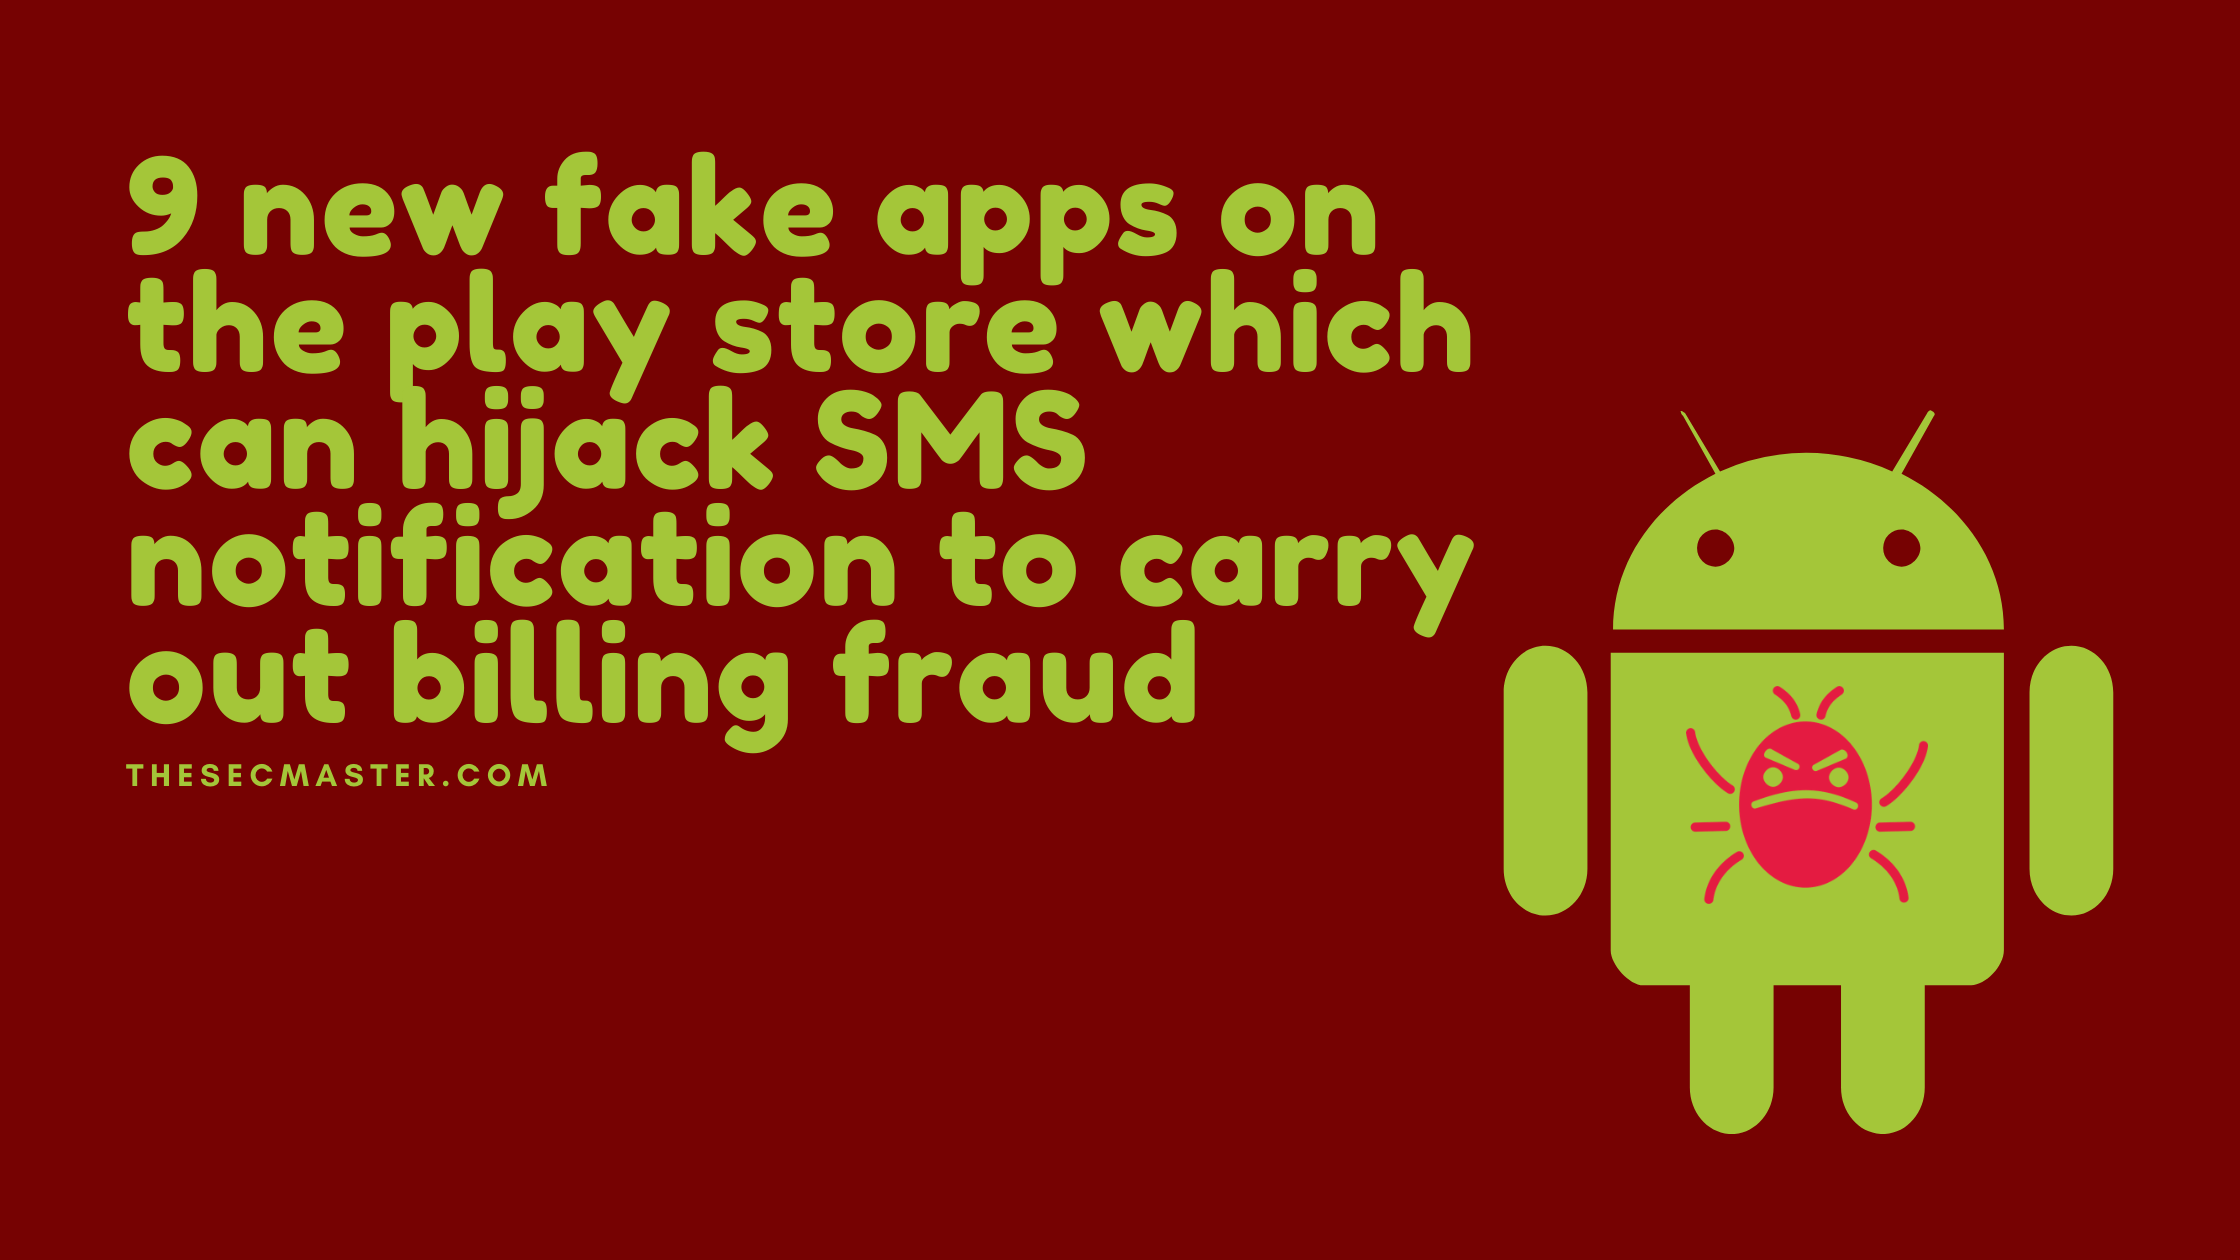 9 New Fake Apps On The Play Store Which Can Hijack Sms Notification To Carry Out Billing Fraud